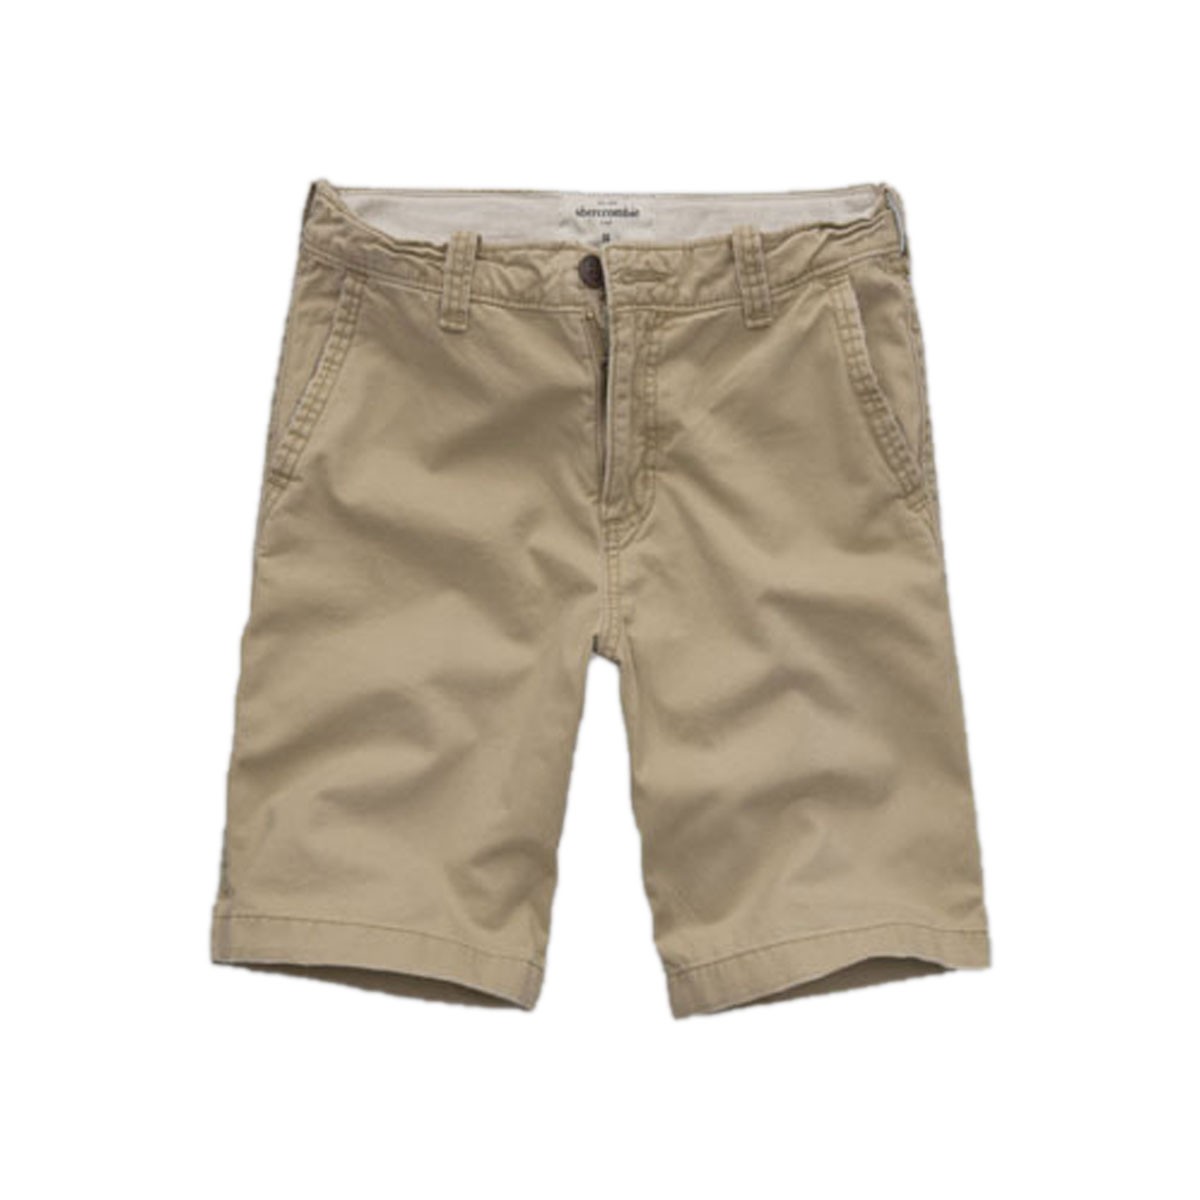 Хå AbercrombieKids  Ҷ ܡ 硼ȥѥ a&f classic fit shorts 228-688-0251-044